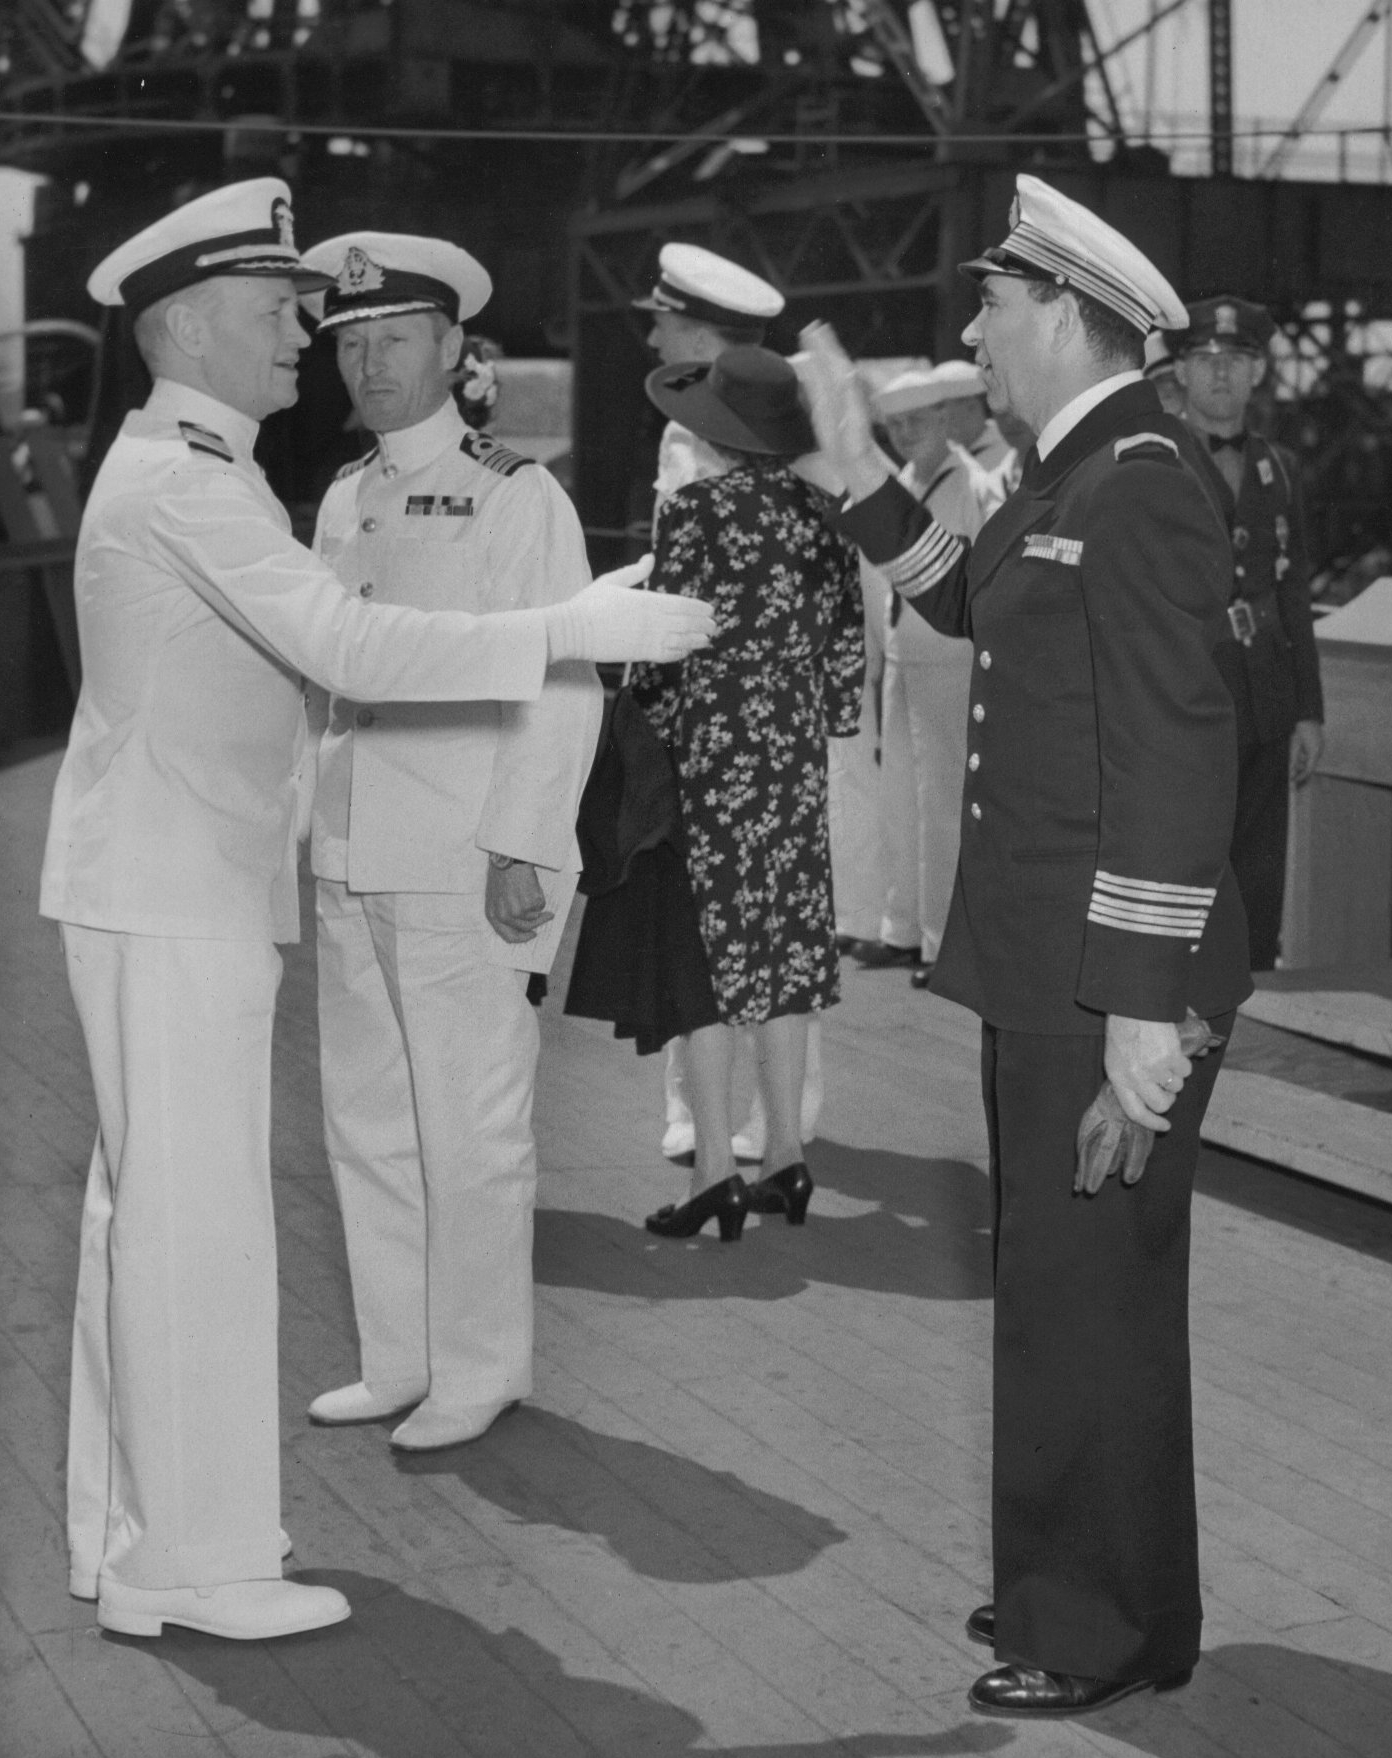 Commissioning ceremony of USS New Jersey, Philadelphia Navy Yard, Pennsylvania, United States, 23 May 1943, photo 09 of 25; note Captain Carl Holden on left